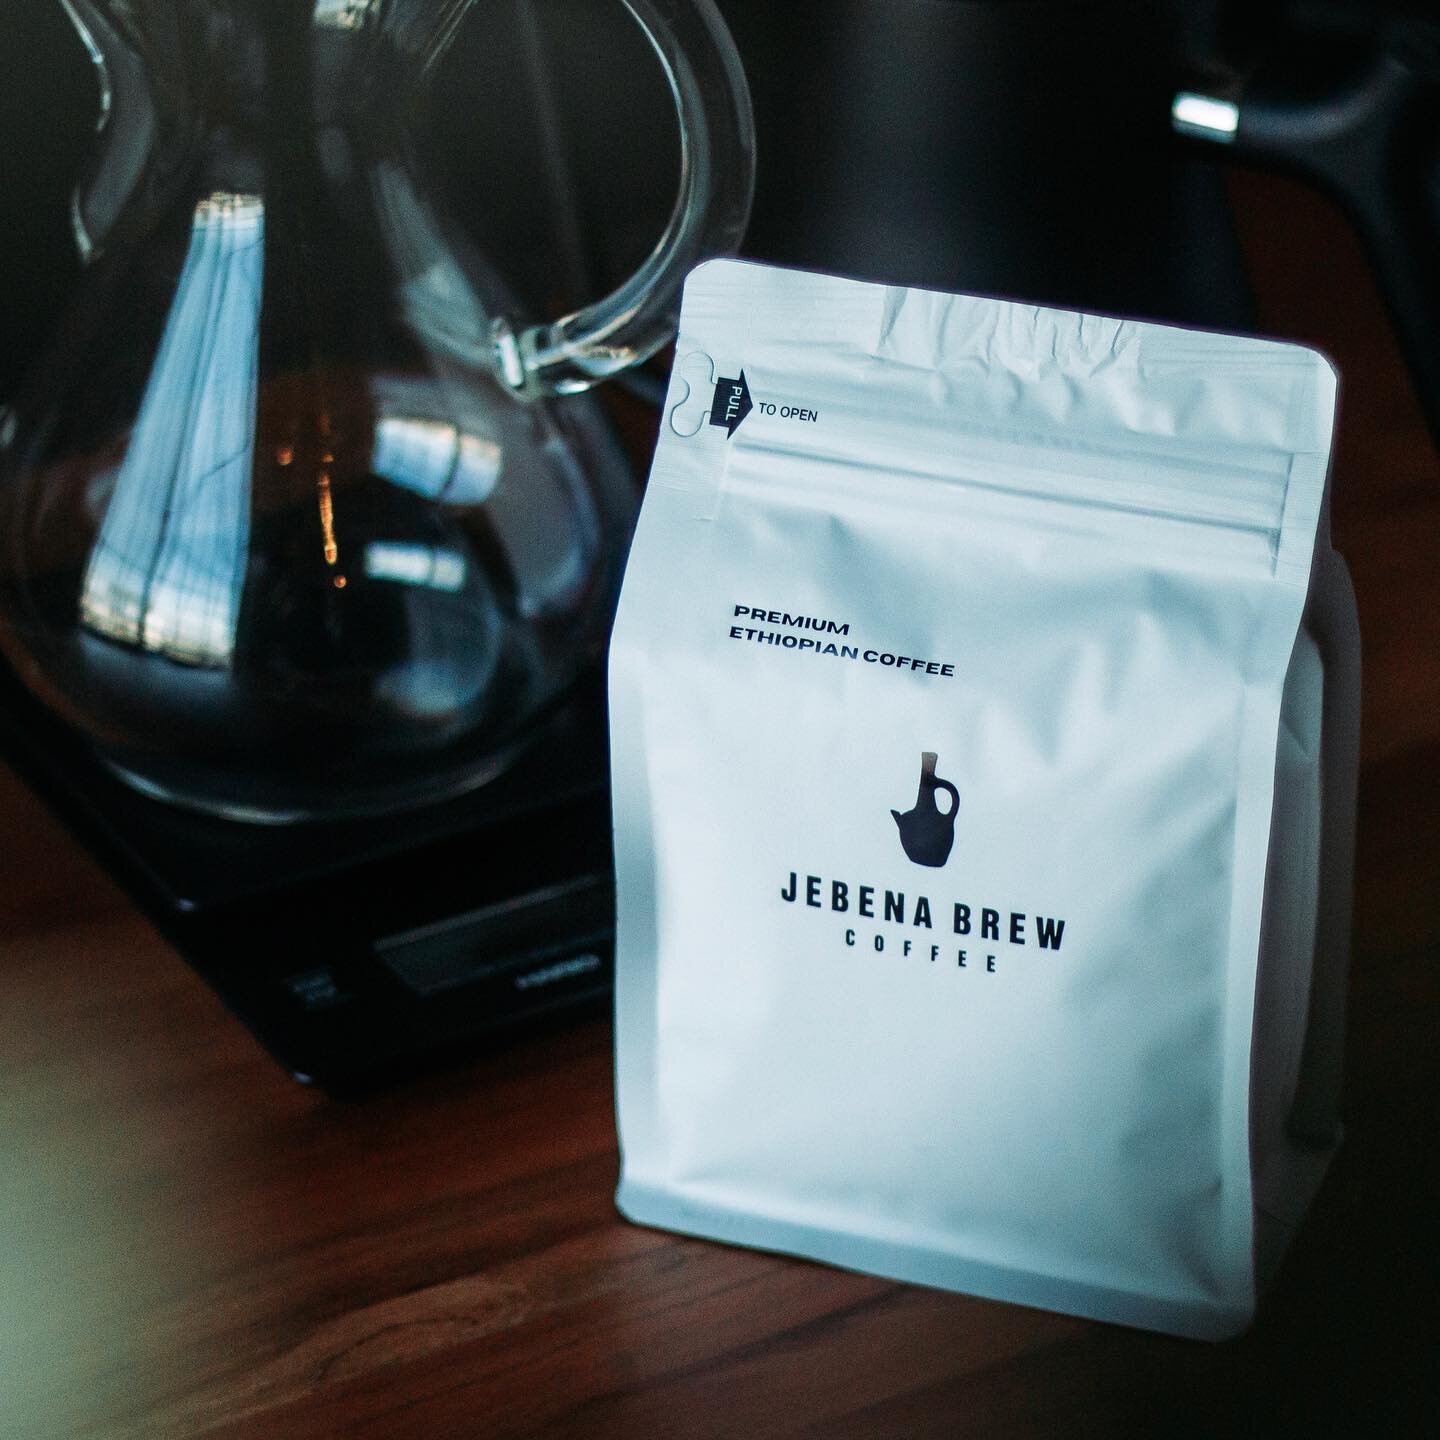 If you know me at all, you know that I have a passion for great coffee. So, here&rsquo;s a quick story.

Over the summer I had a potential client reach out to me about a website for the coffee brand he was starting. Obviously, I was interested to kno